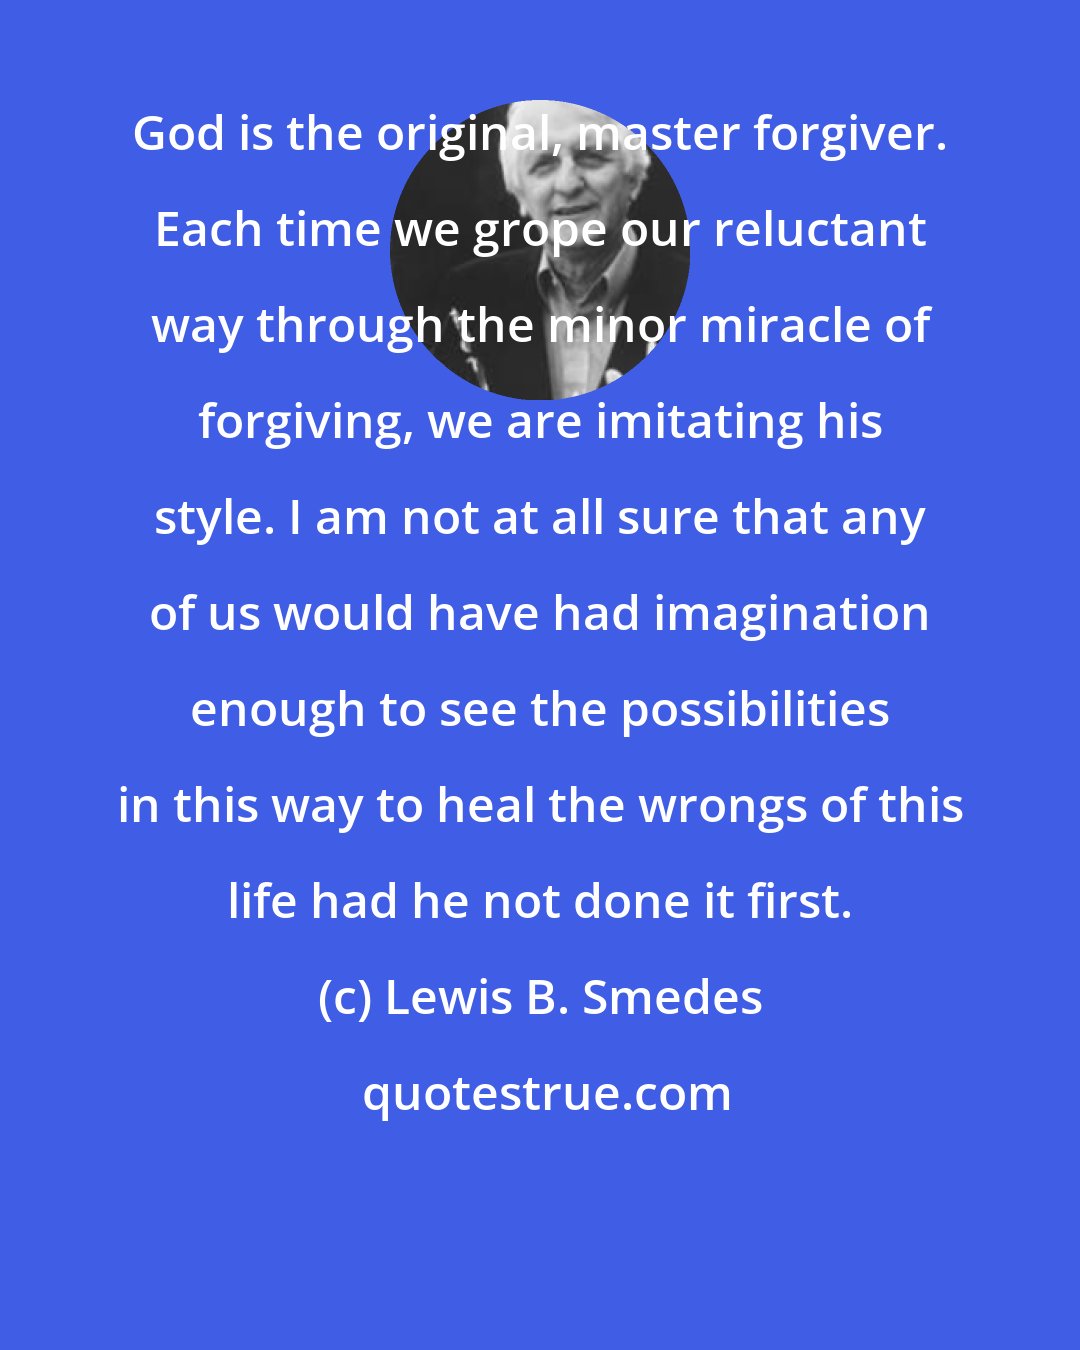 Lewis B. Smedes: God is the original, master forgiver. Each time we grope our reluctant way through the minor miracle of forgiving, we are imitating his style. I am not at all sure that any of us would have had imagination enough to see the possibilities in this way to heal the wrongs of this life had he not done it first.